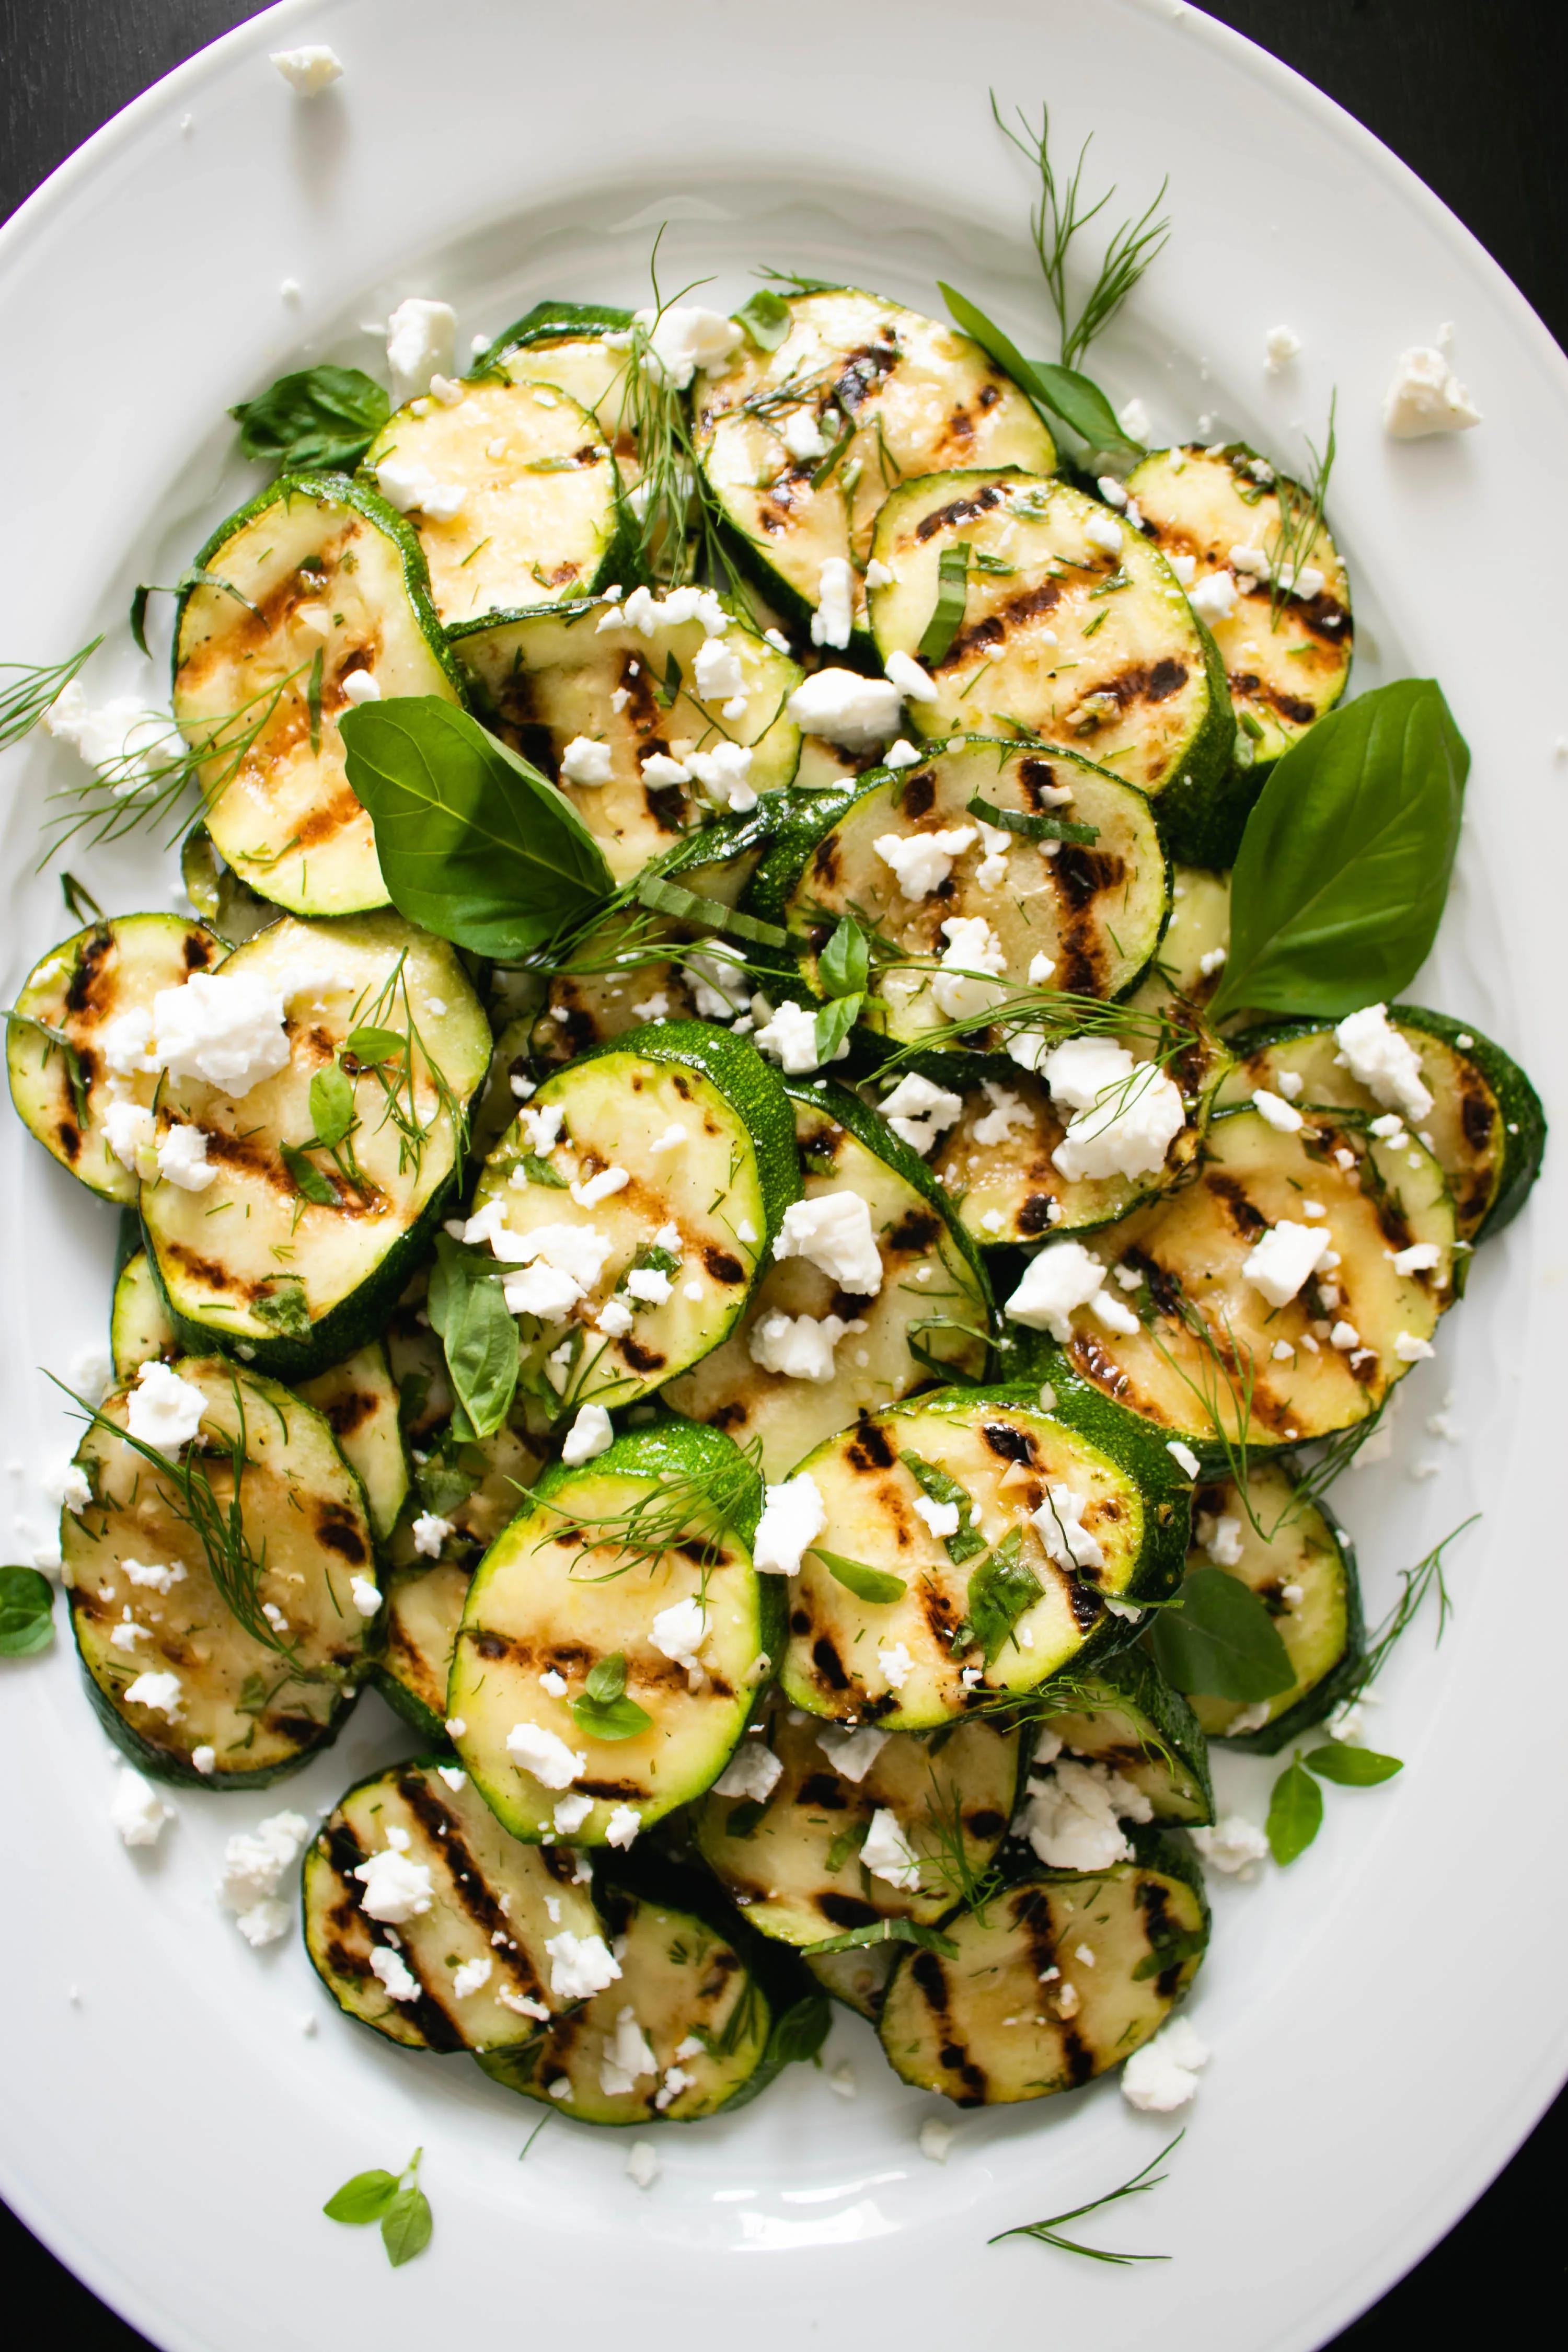 Grilled Zucchini with Feta Cheese - The Delicious plate